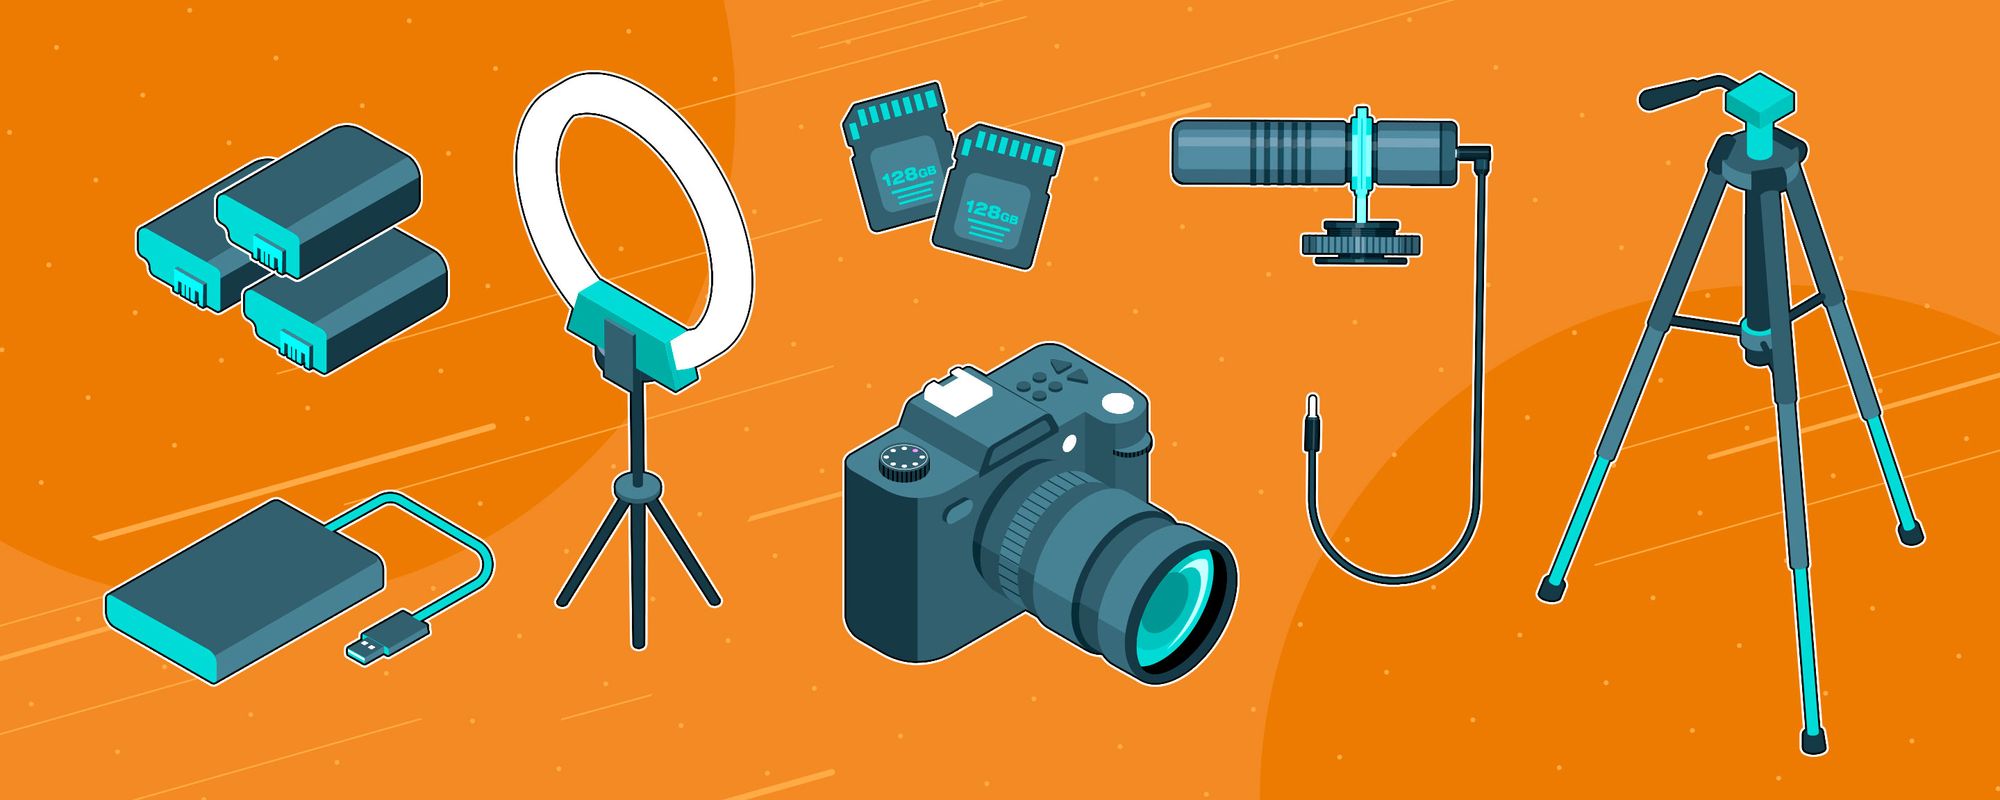 Illustration of different types of accessories for filming YouTube videos.